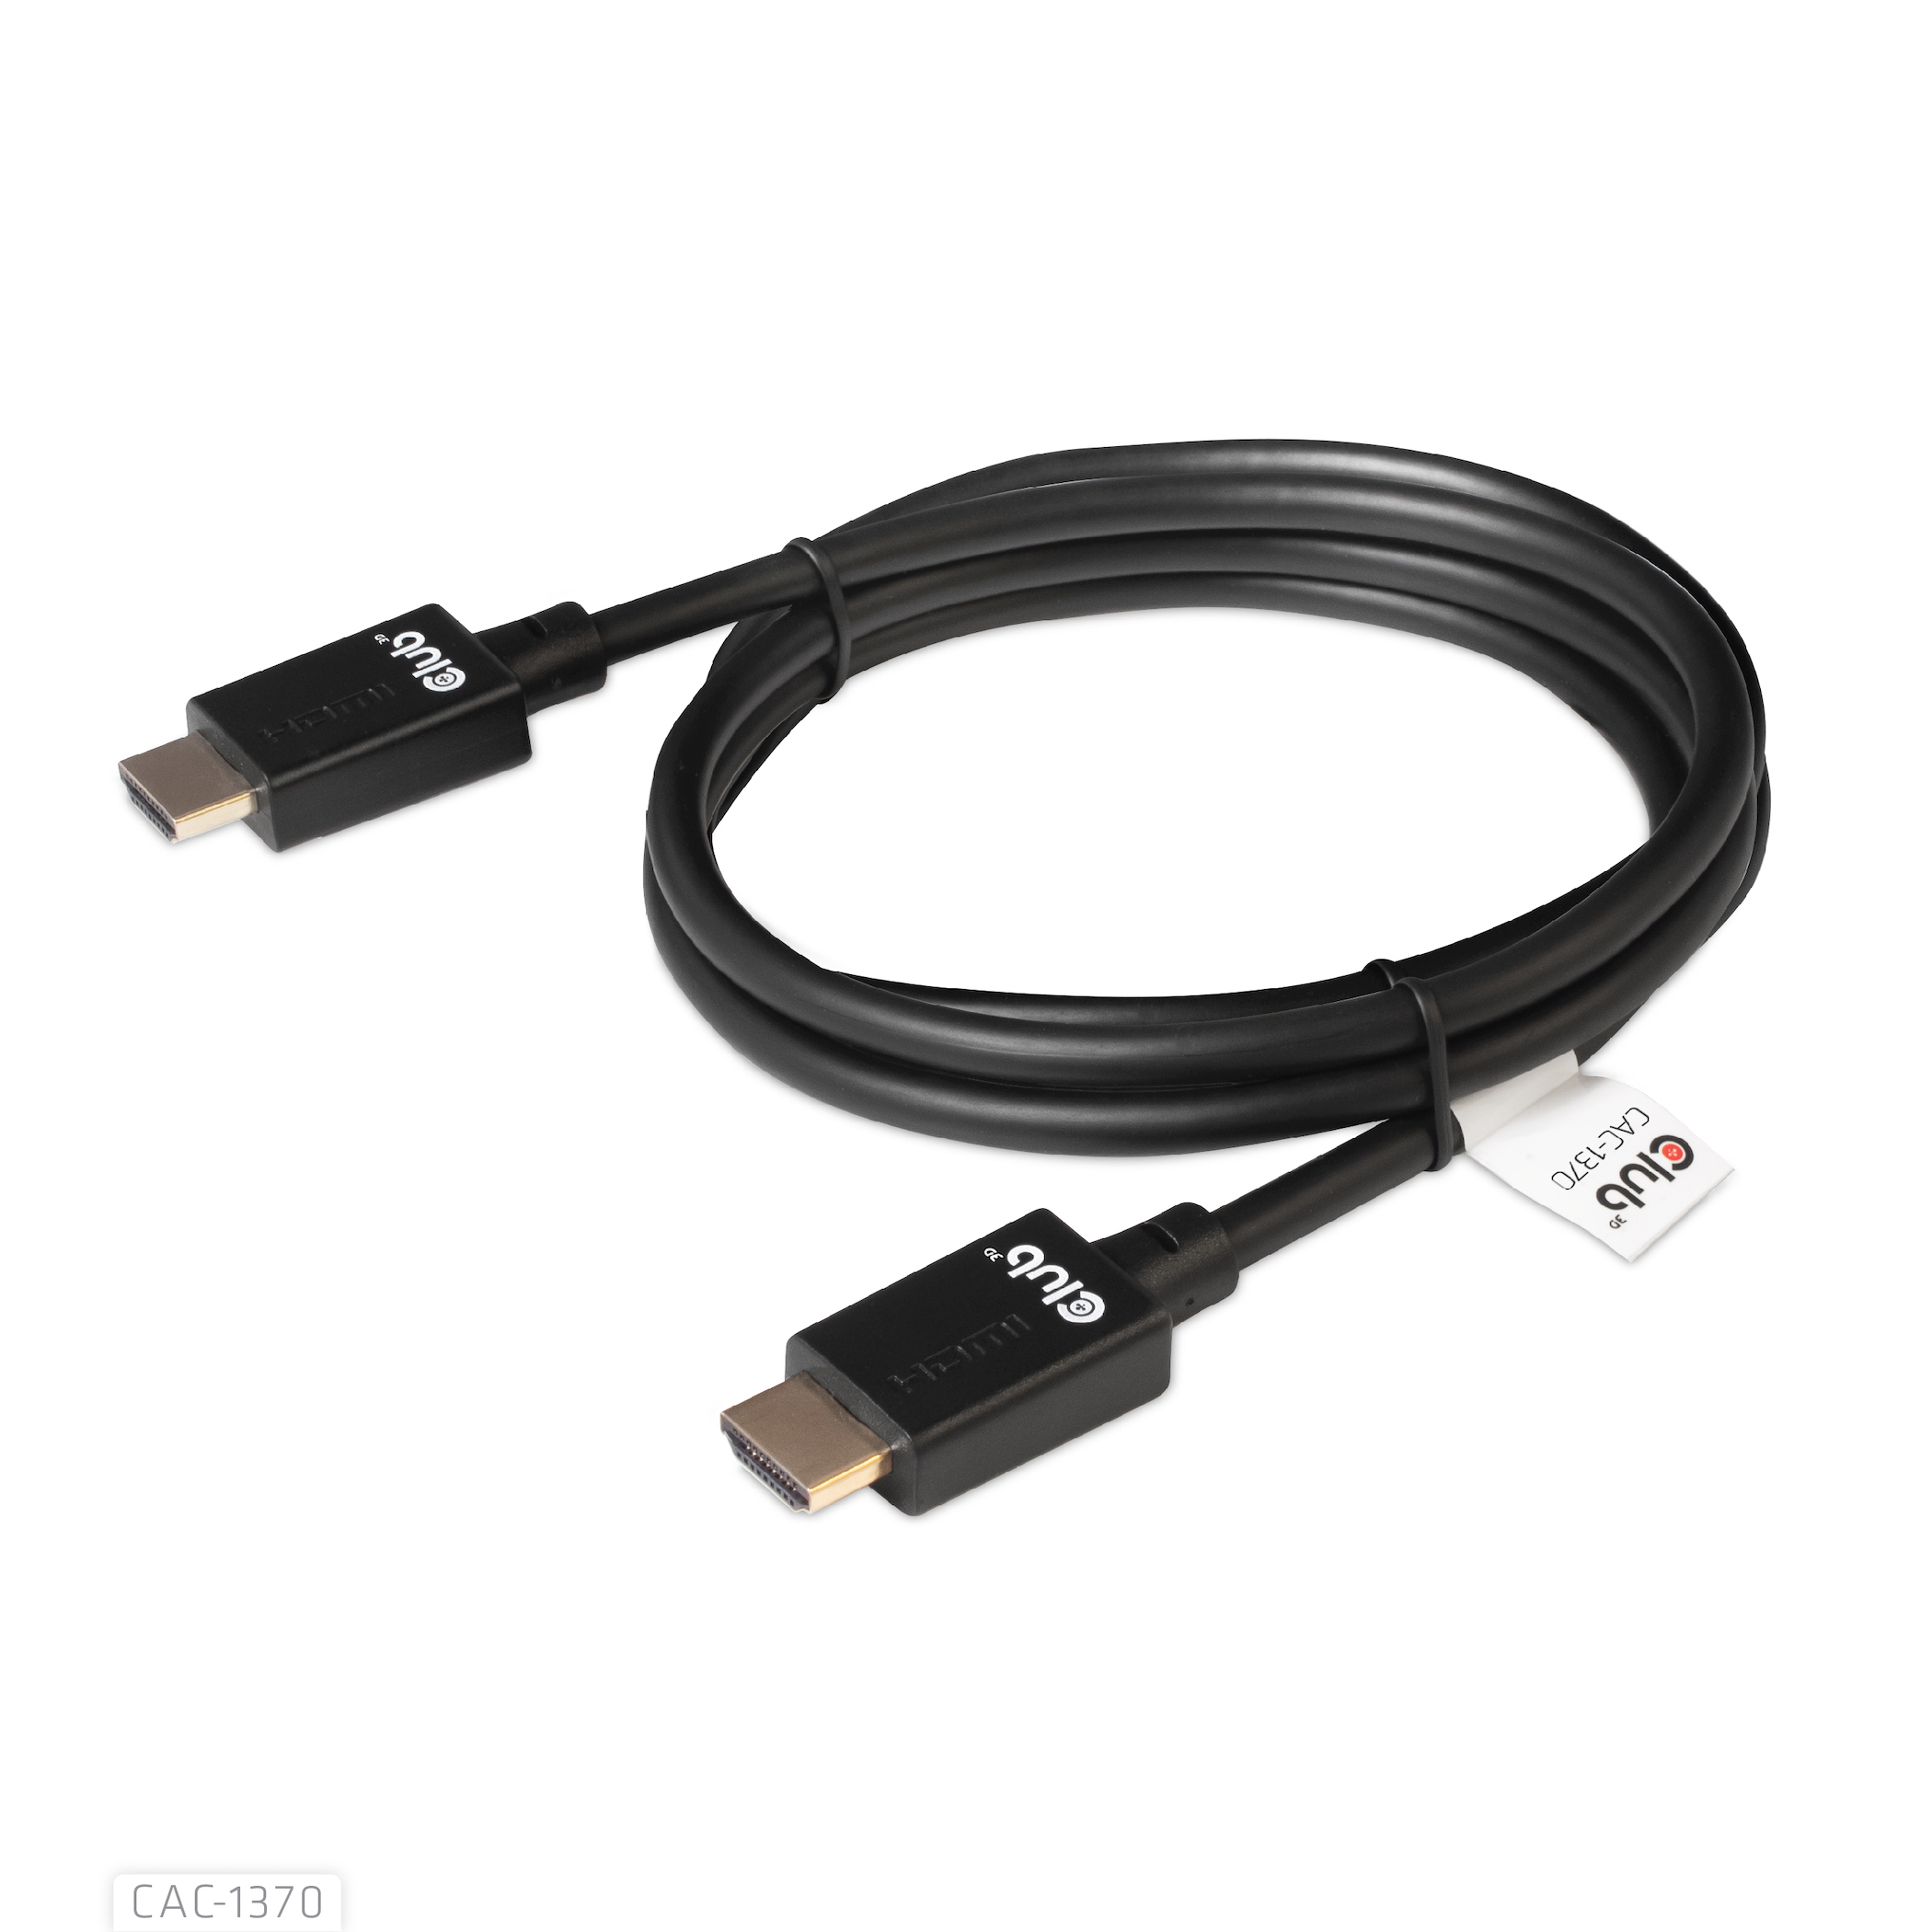 HDMI 2.1 MALE TO HDMI 2.1 MALE ULTRA HIGH SPEED 10K 120Hz  1m.5/ 4.928ft